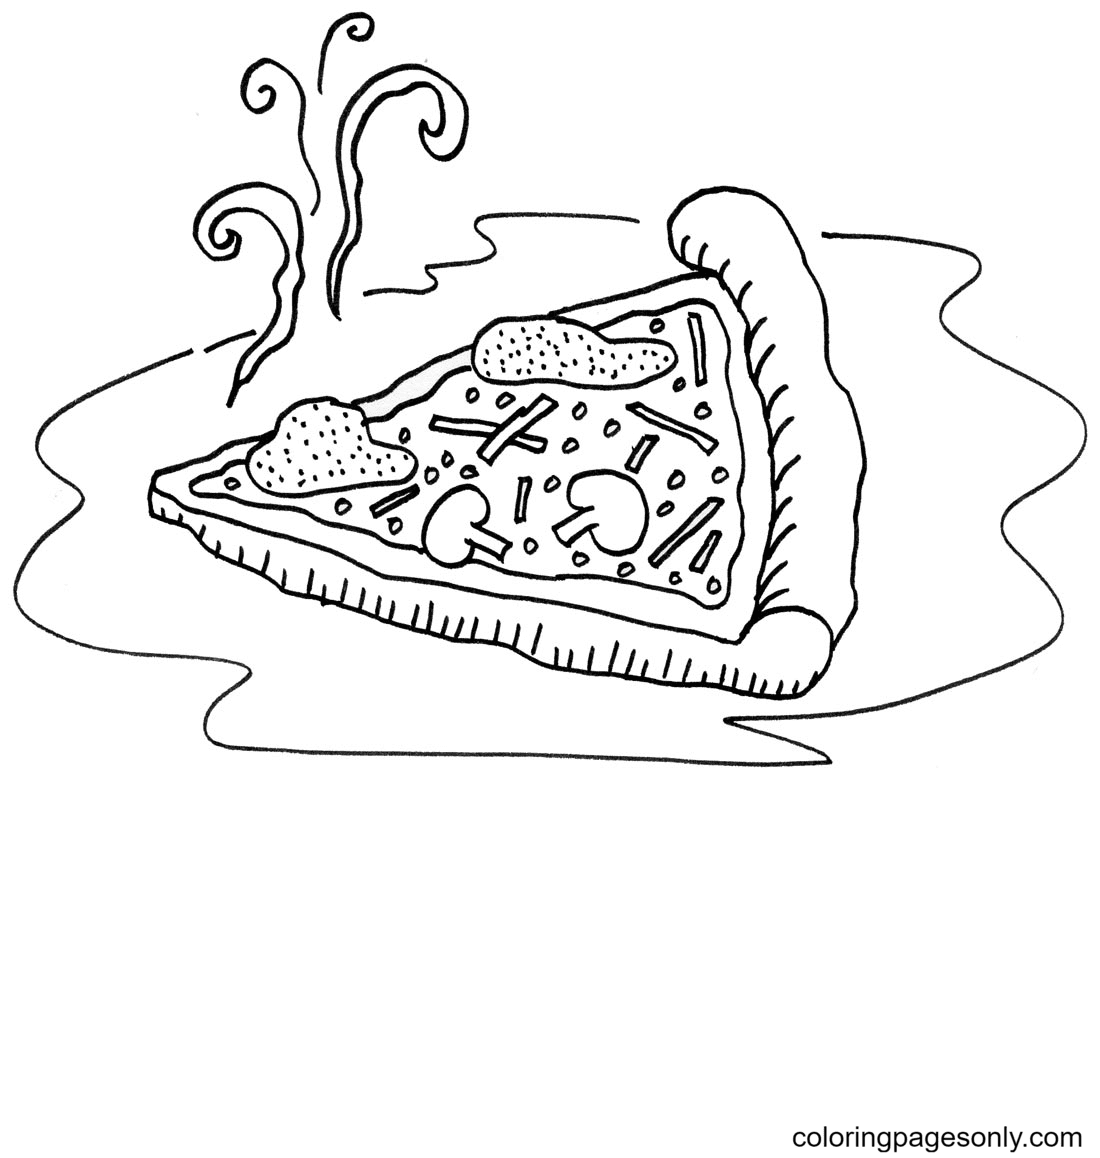 A freshly-baked Slices of Pizza Coloring Page